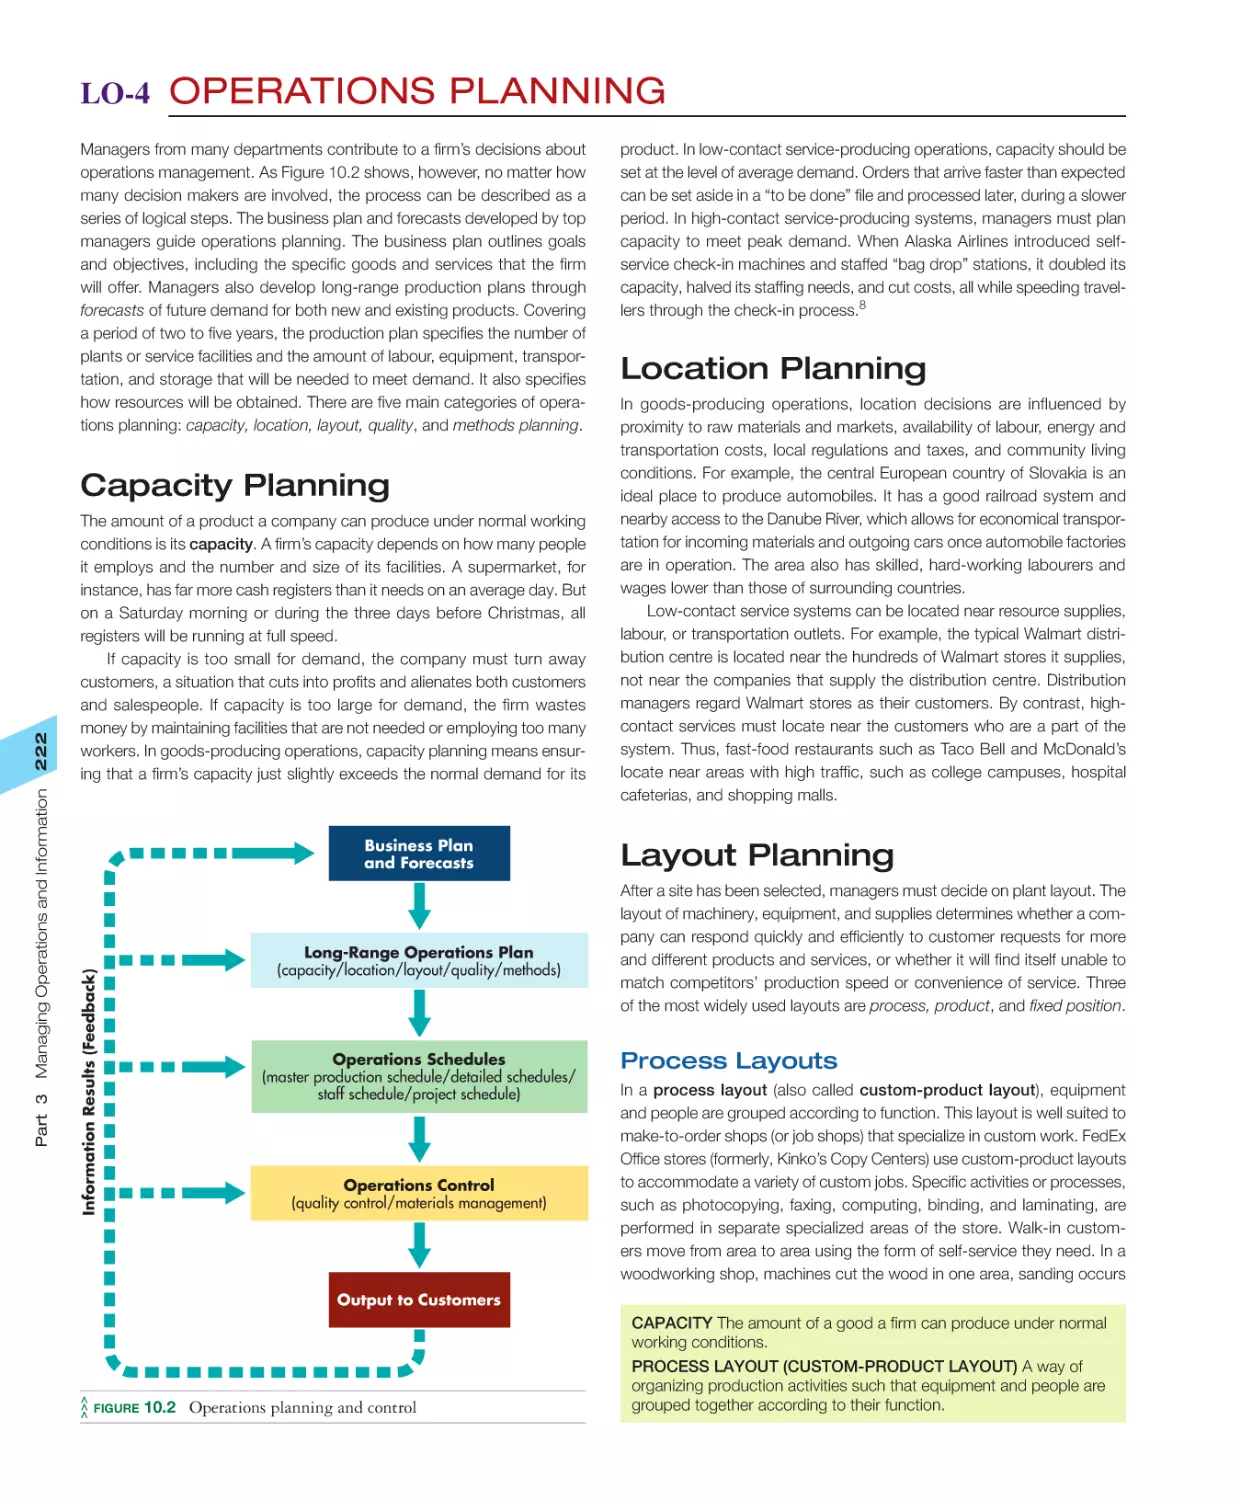 LO‐4 Operations Planning
Location Planning
Layout Planning